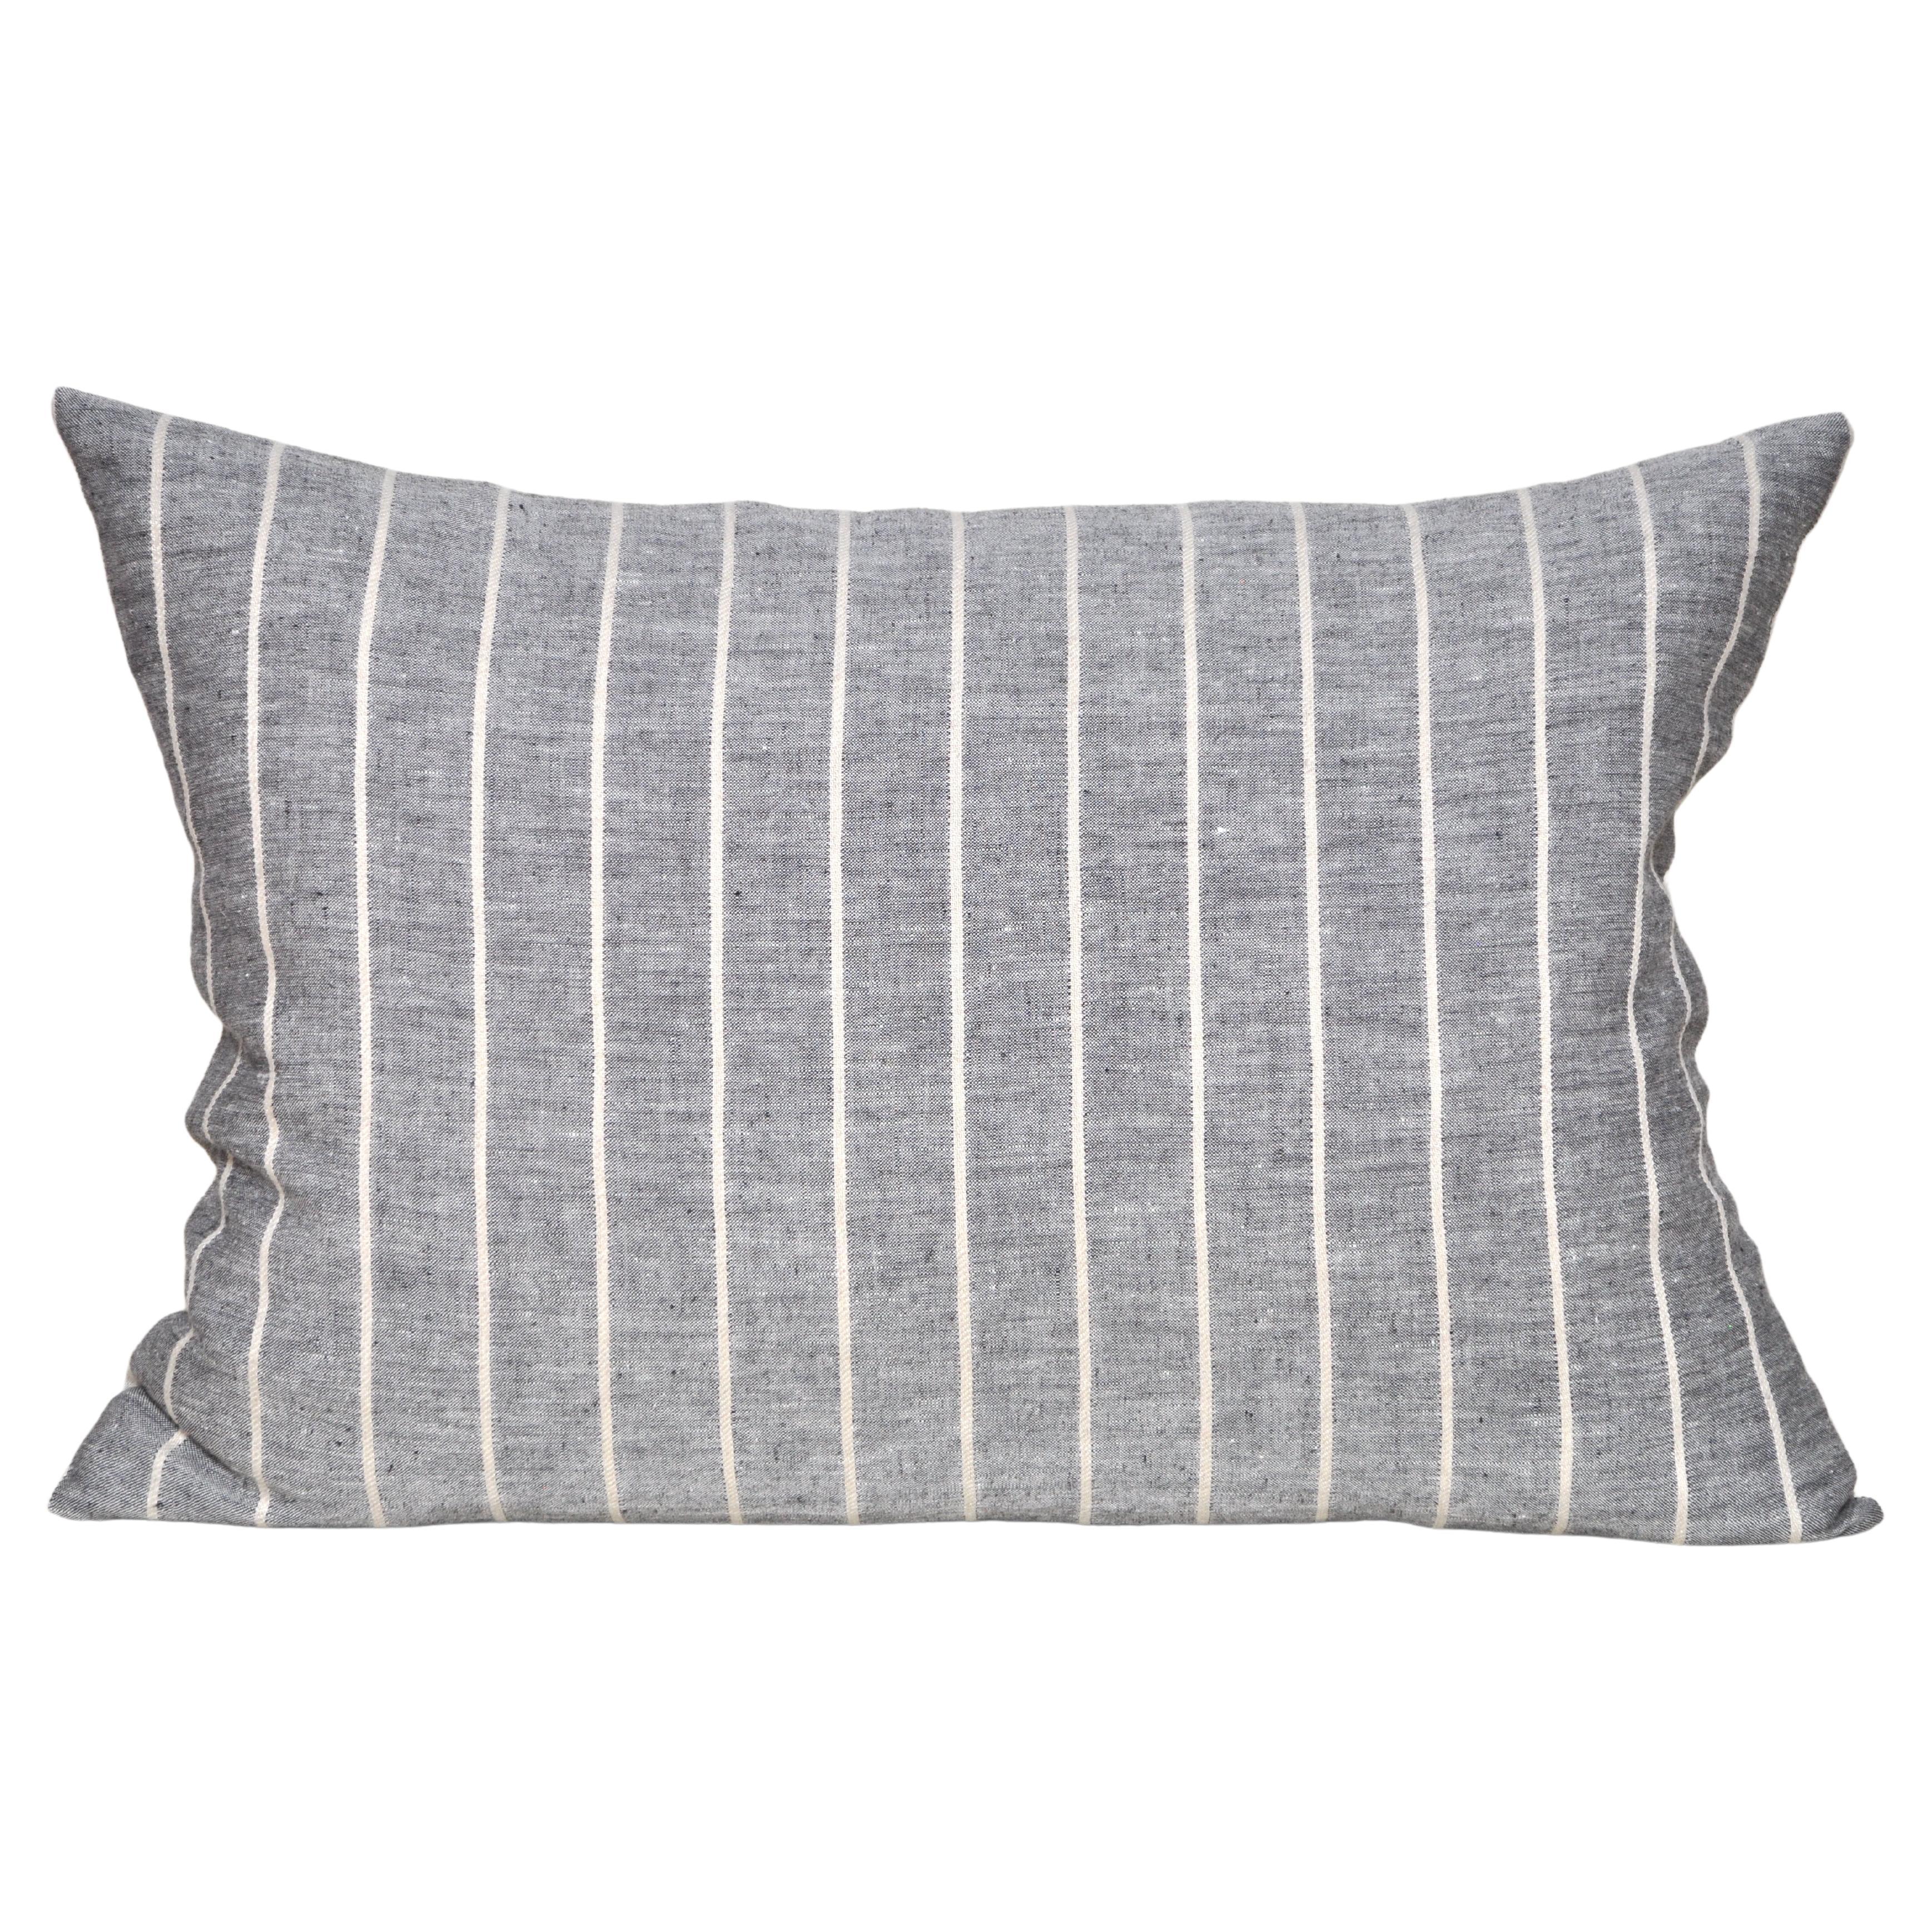 Luxury Vintage Irish Linen Pillow by Katie Larmour Couture Cushions Navy Grey For Sale